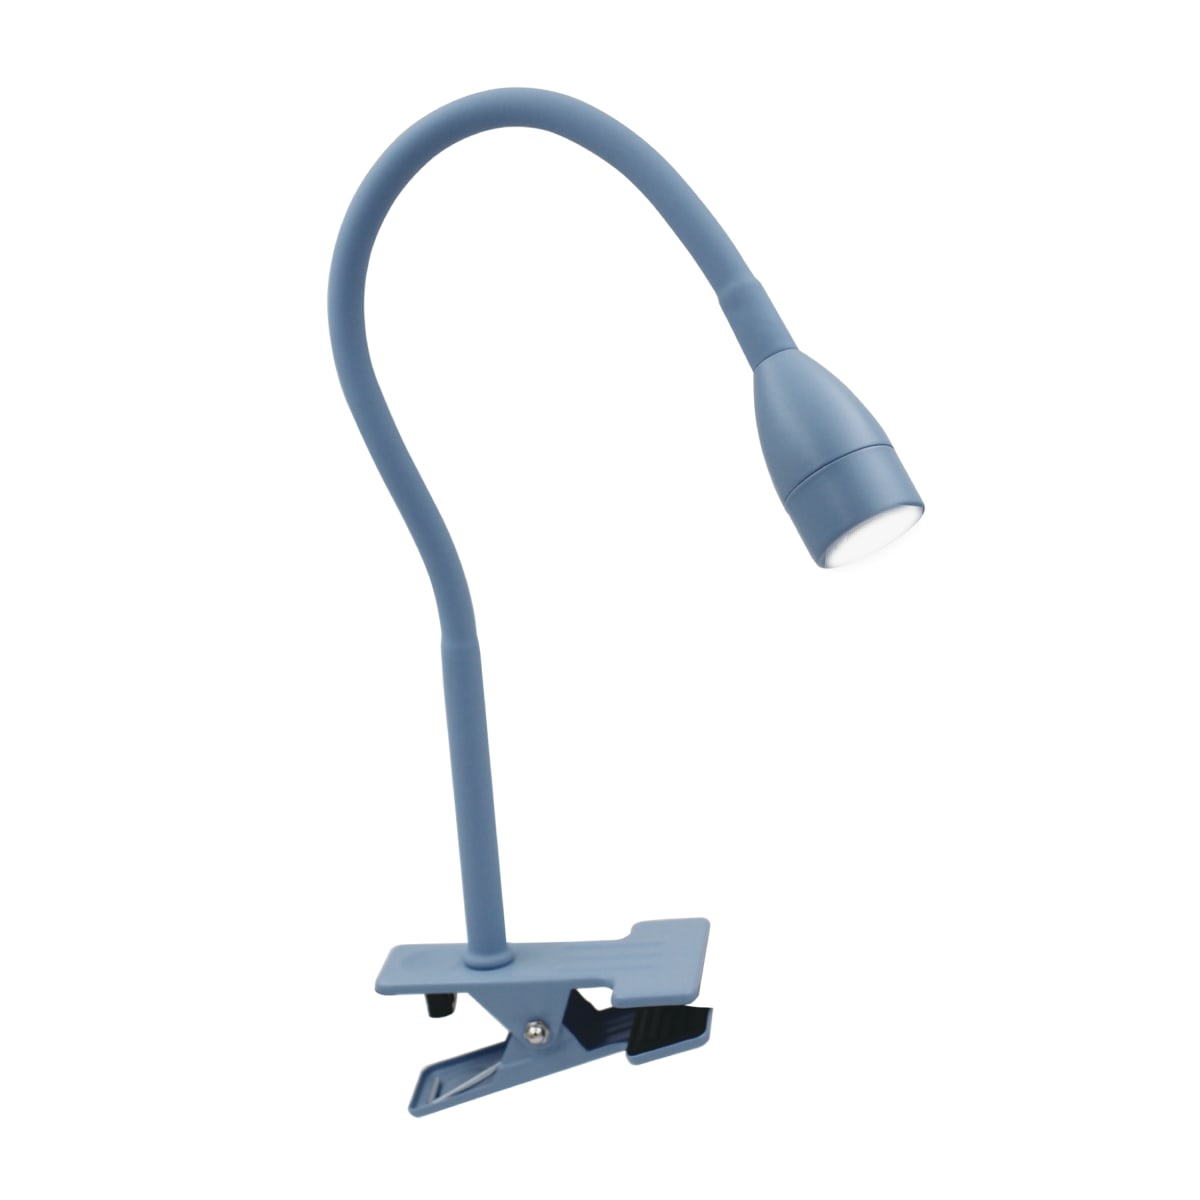 STUDIO LAMP GAO PLASTIC BLUE LED 3.5W NATURAL LIGHT WITH CLAMP